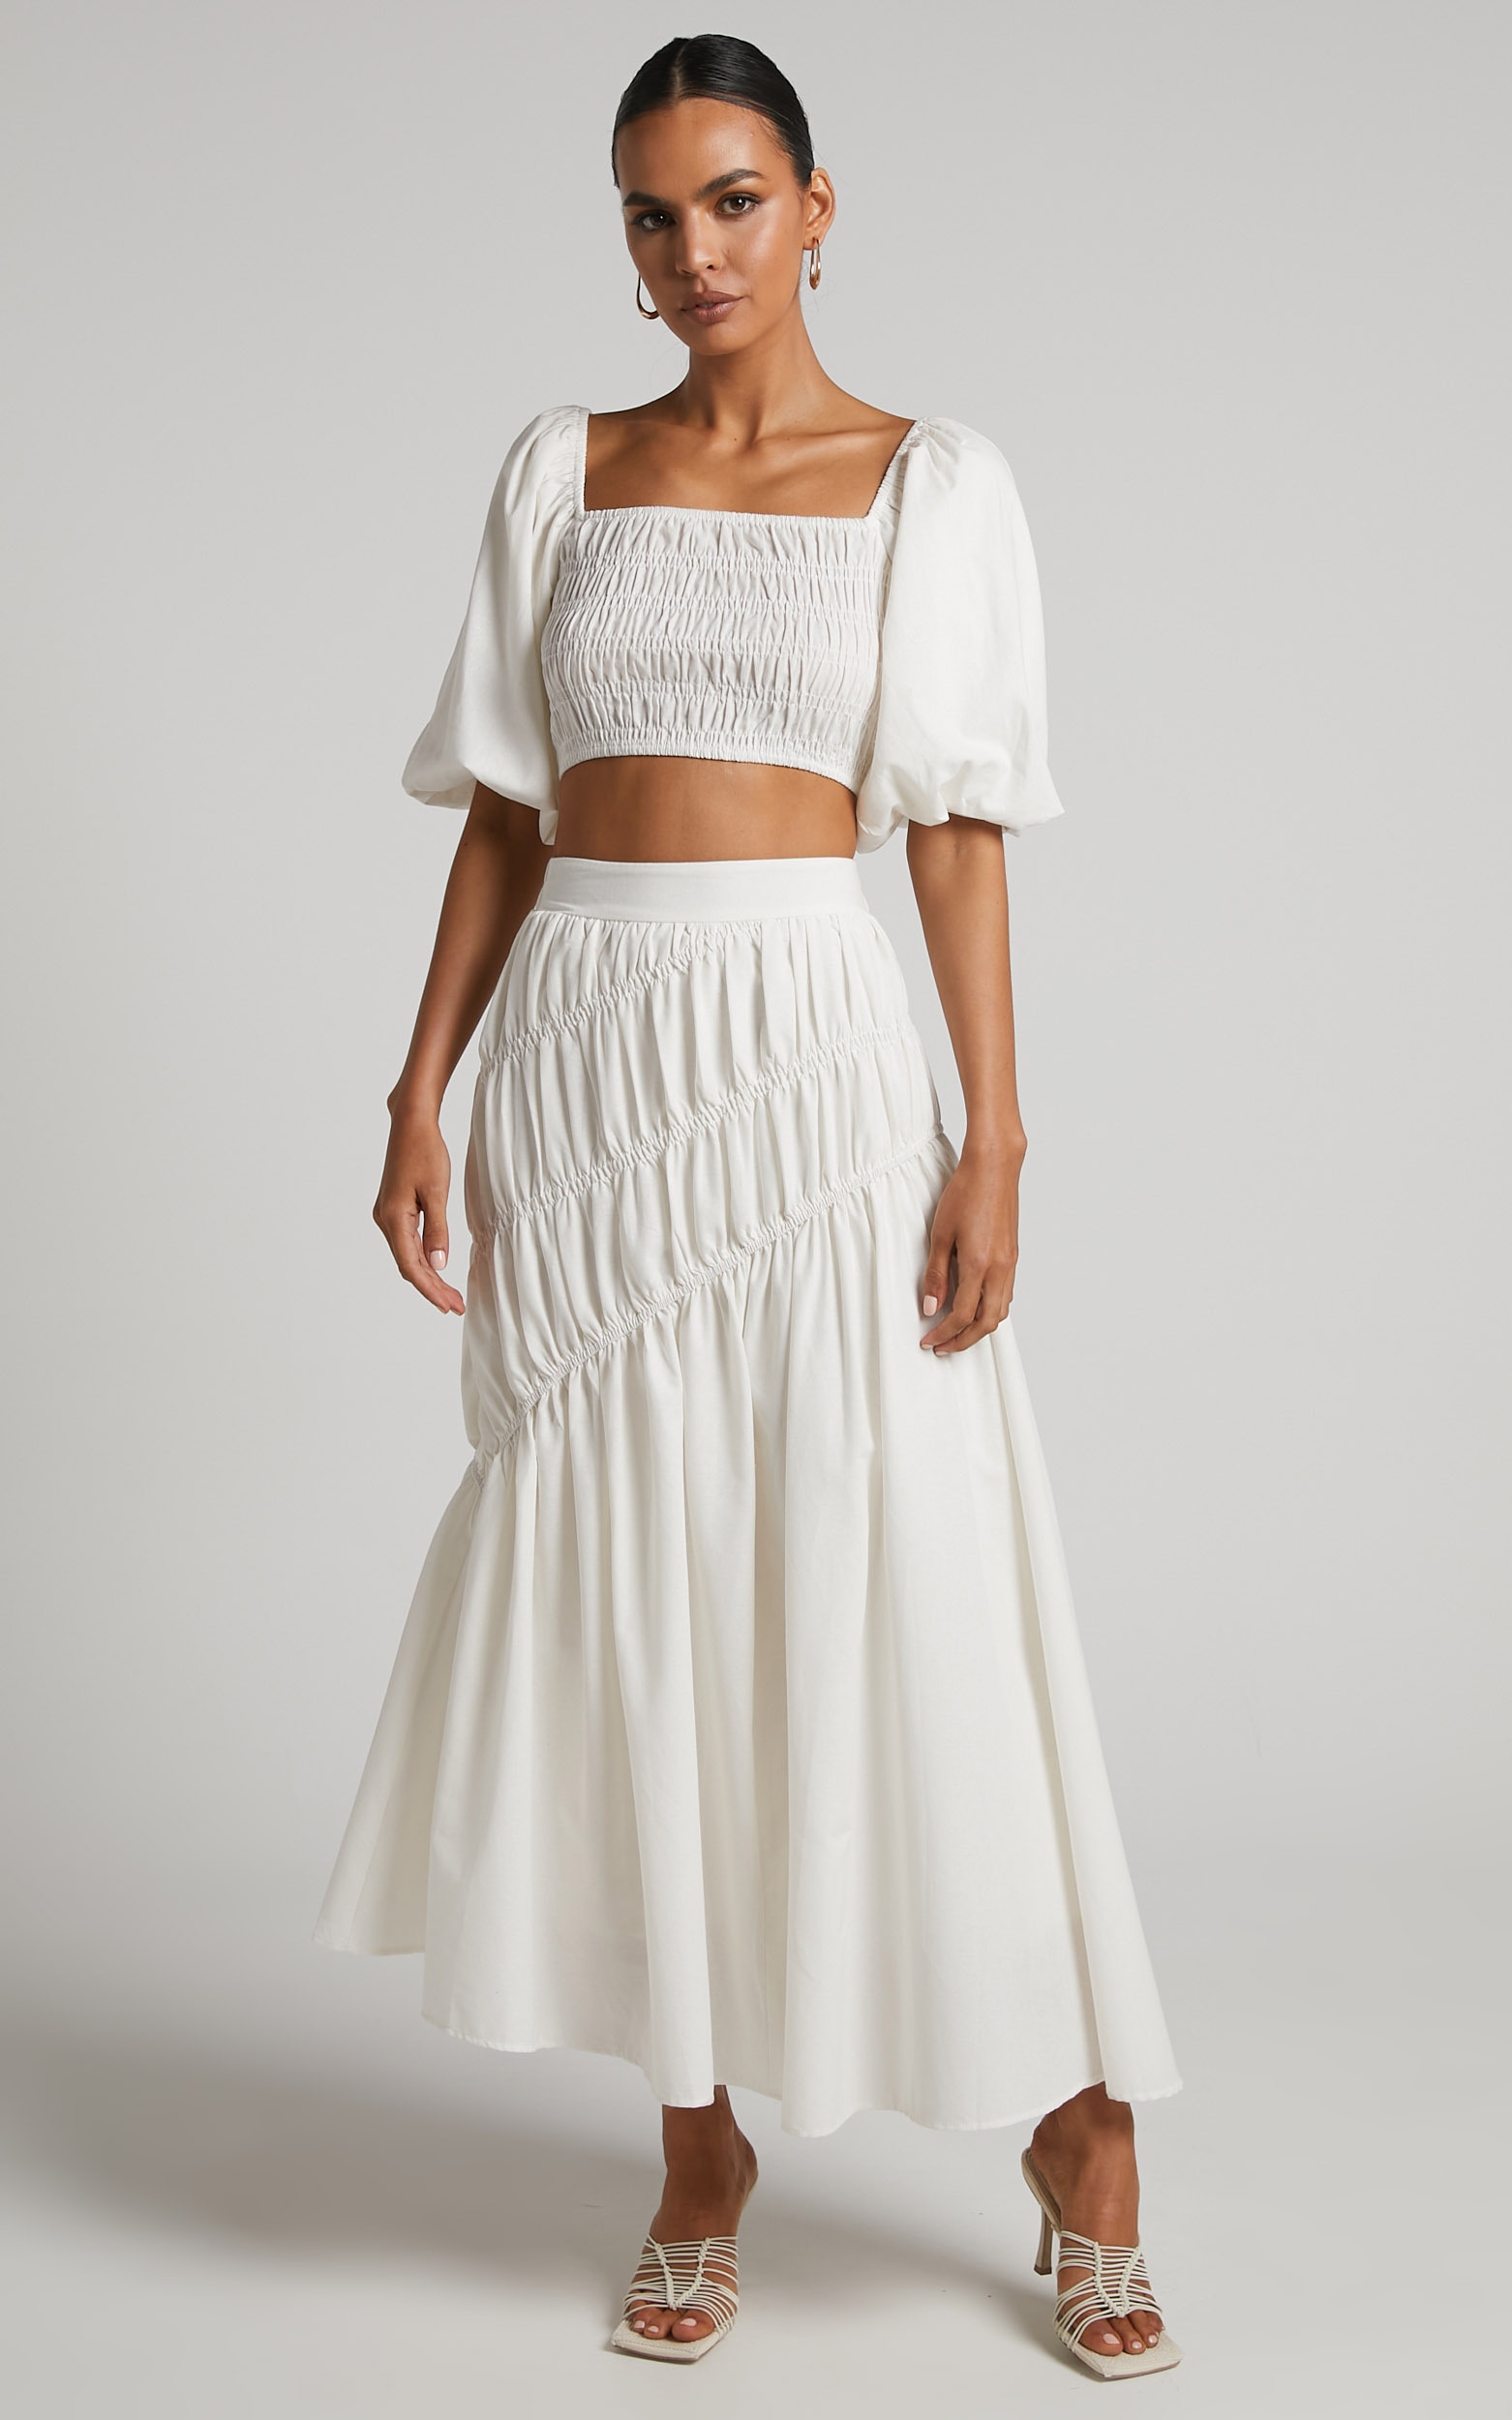 Elina Shirred Tierred Linen Maxi Skirt in White - 06, WHT1, hi-res image number null